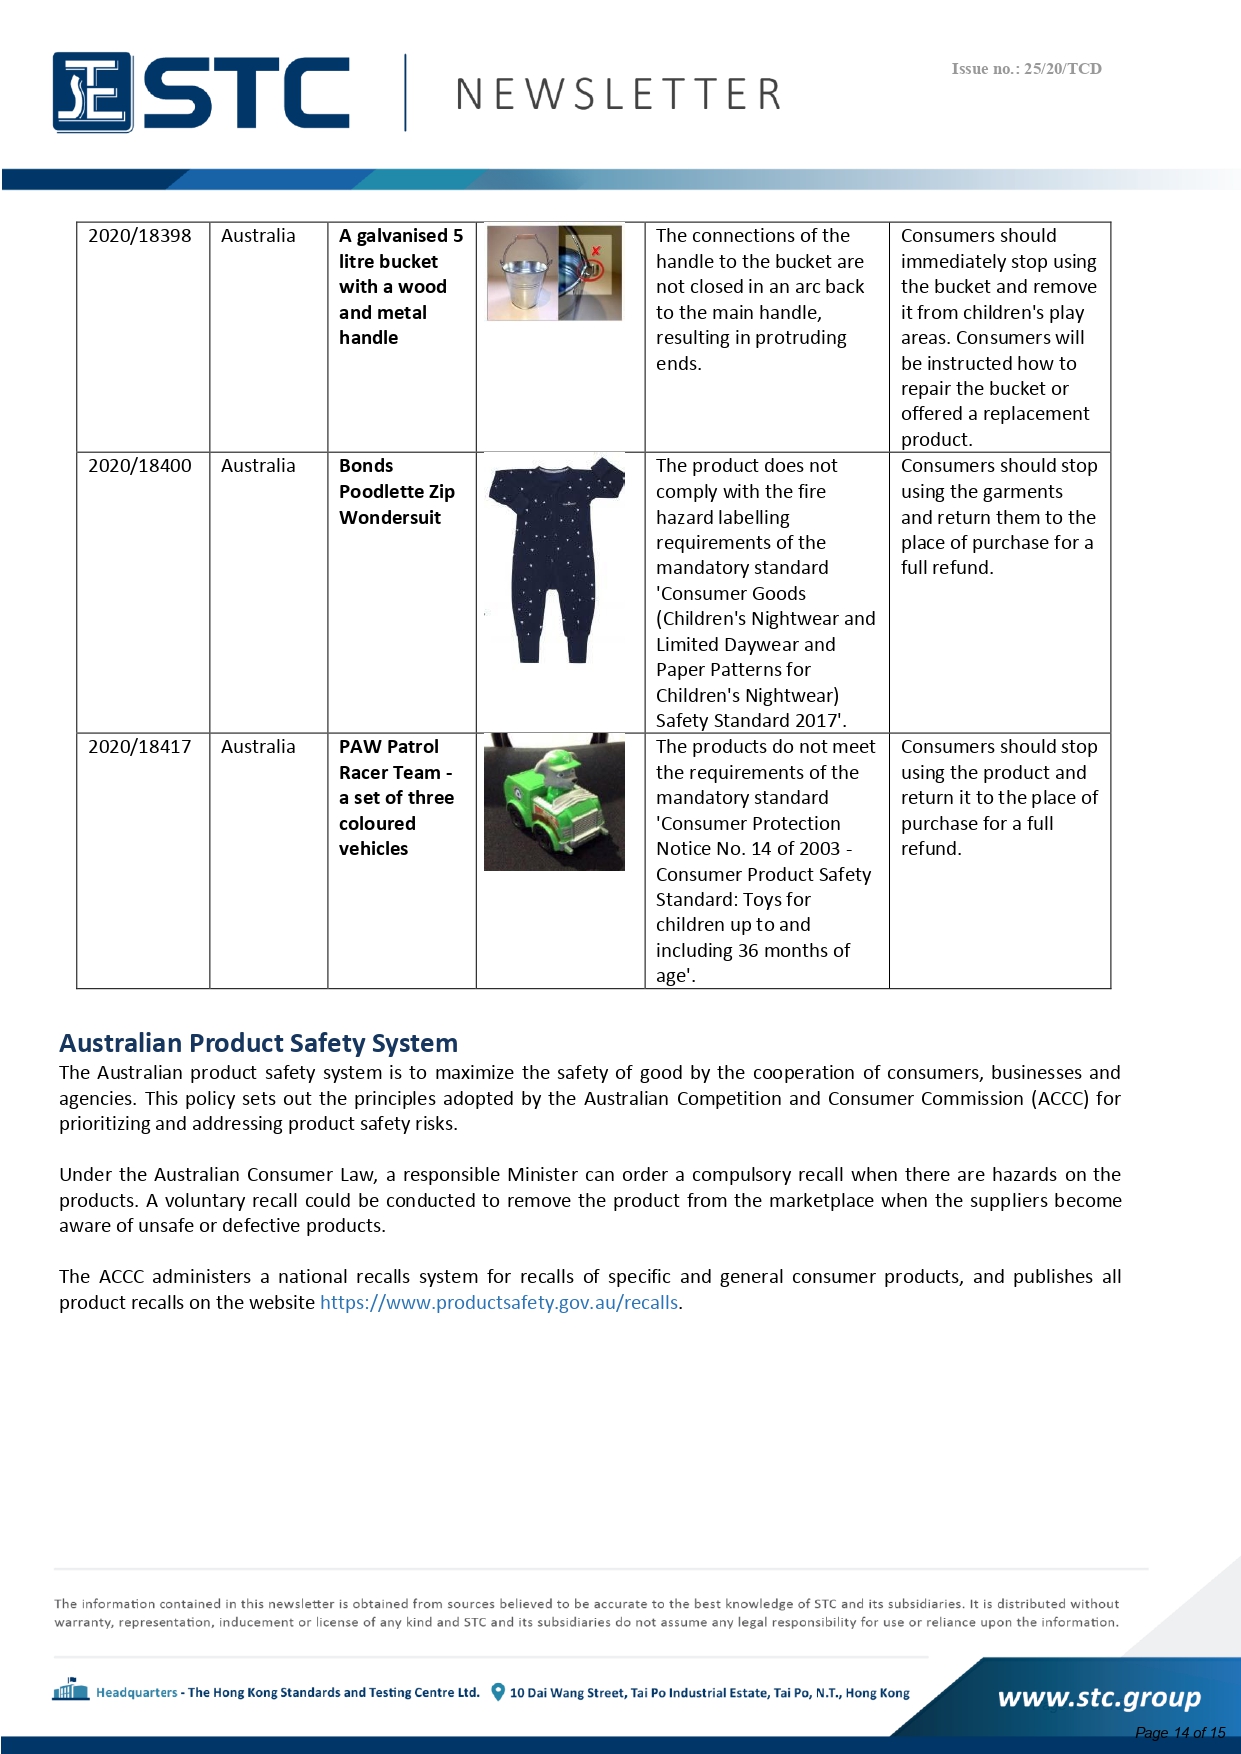 Product Safety Requirements in Garments Industry